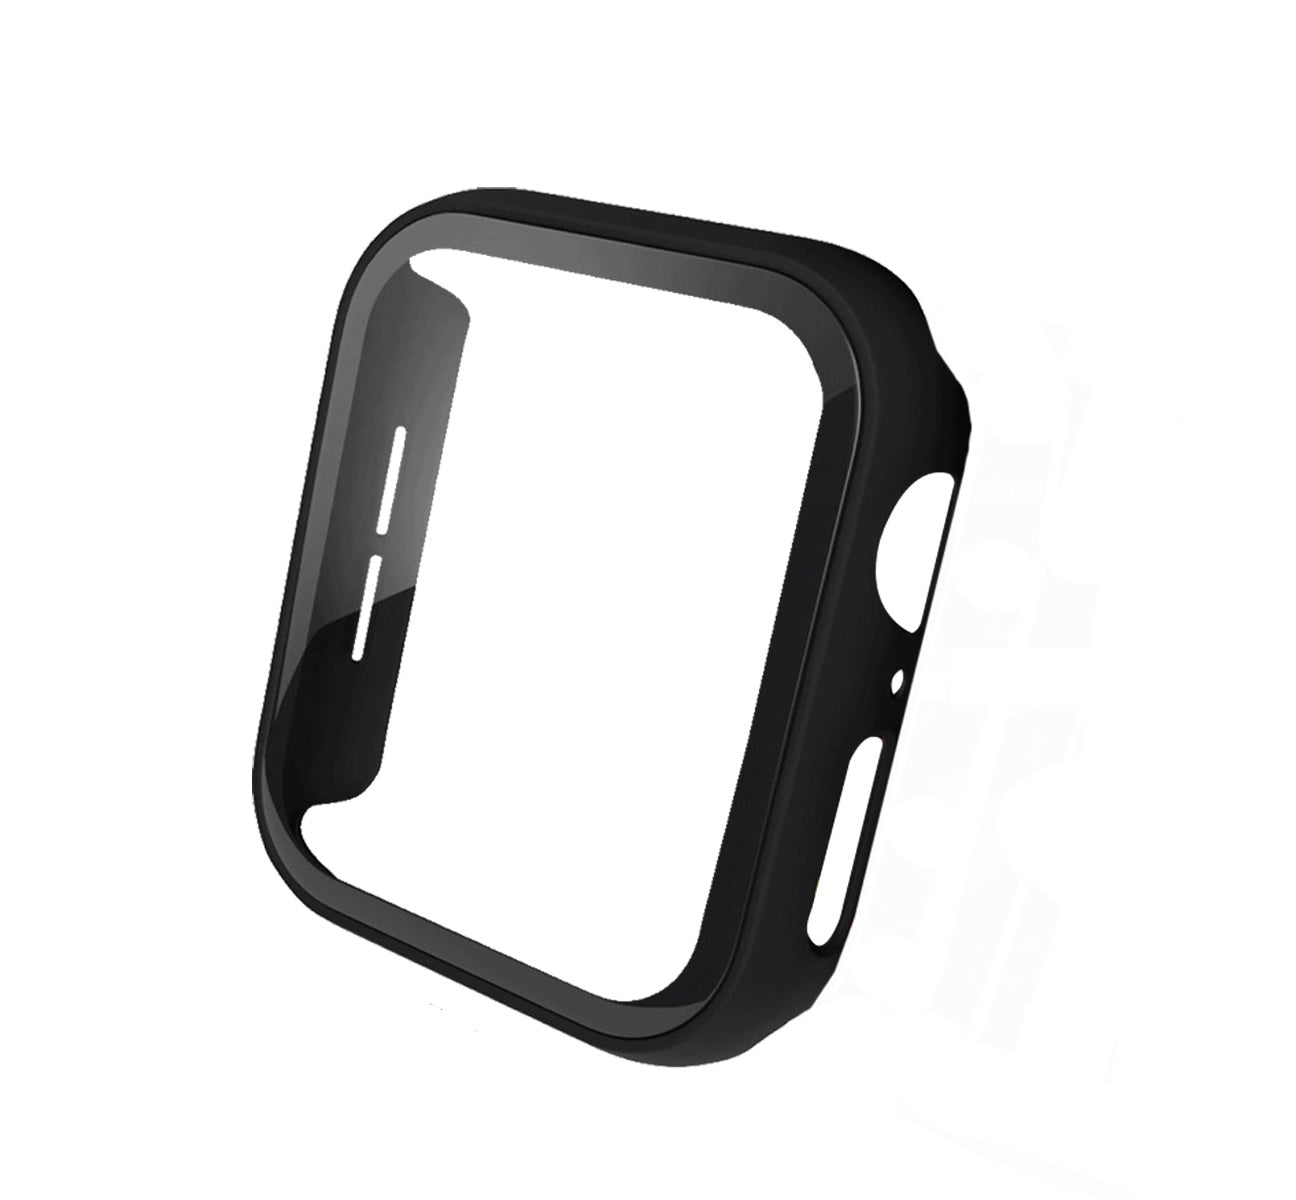 FLAUNT IWATCH PROTECTOR 42MM (Apple Watch Series-1,2,3)(Black)